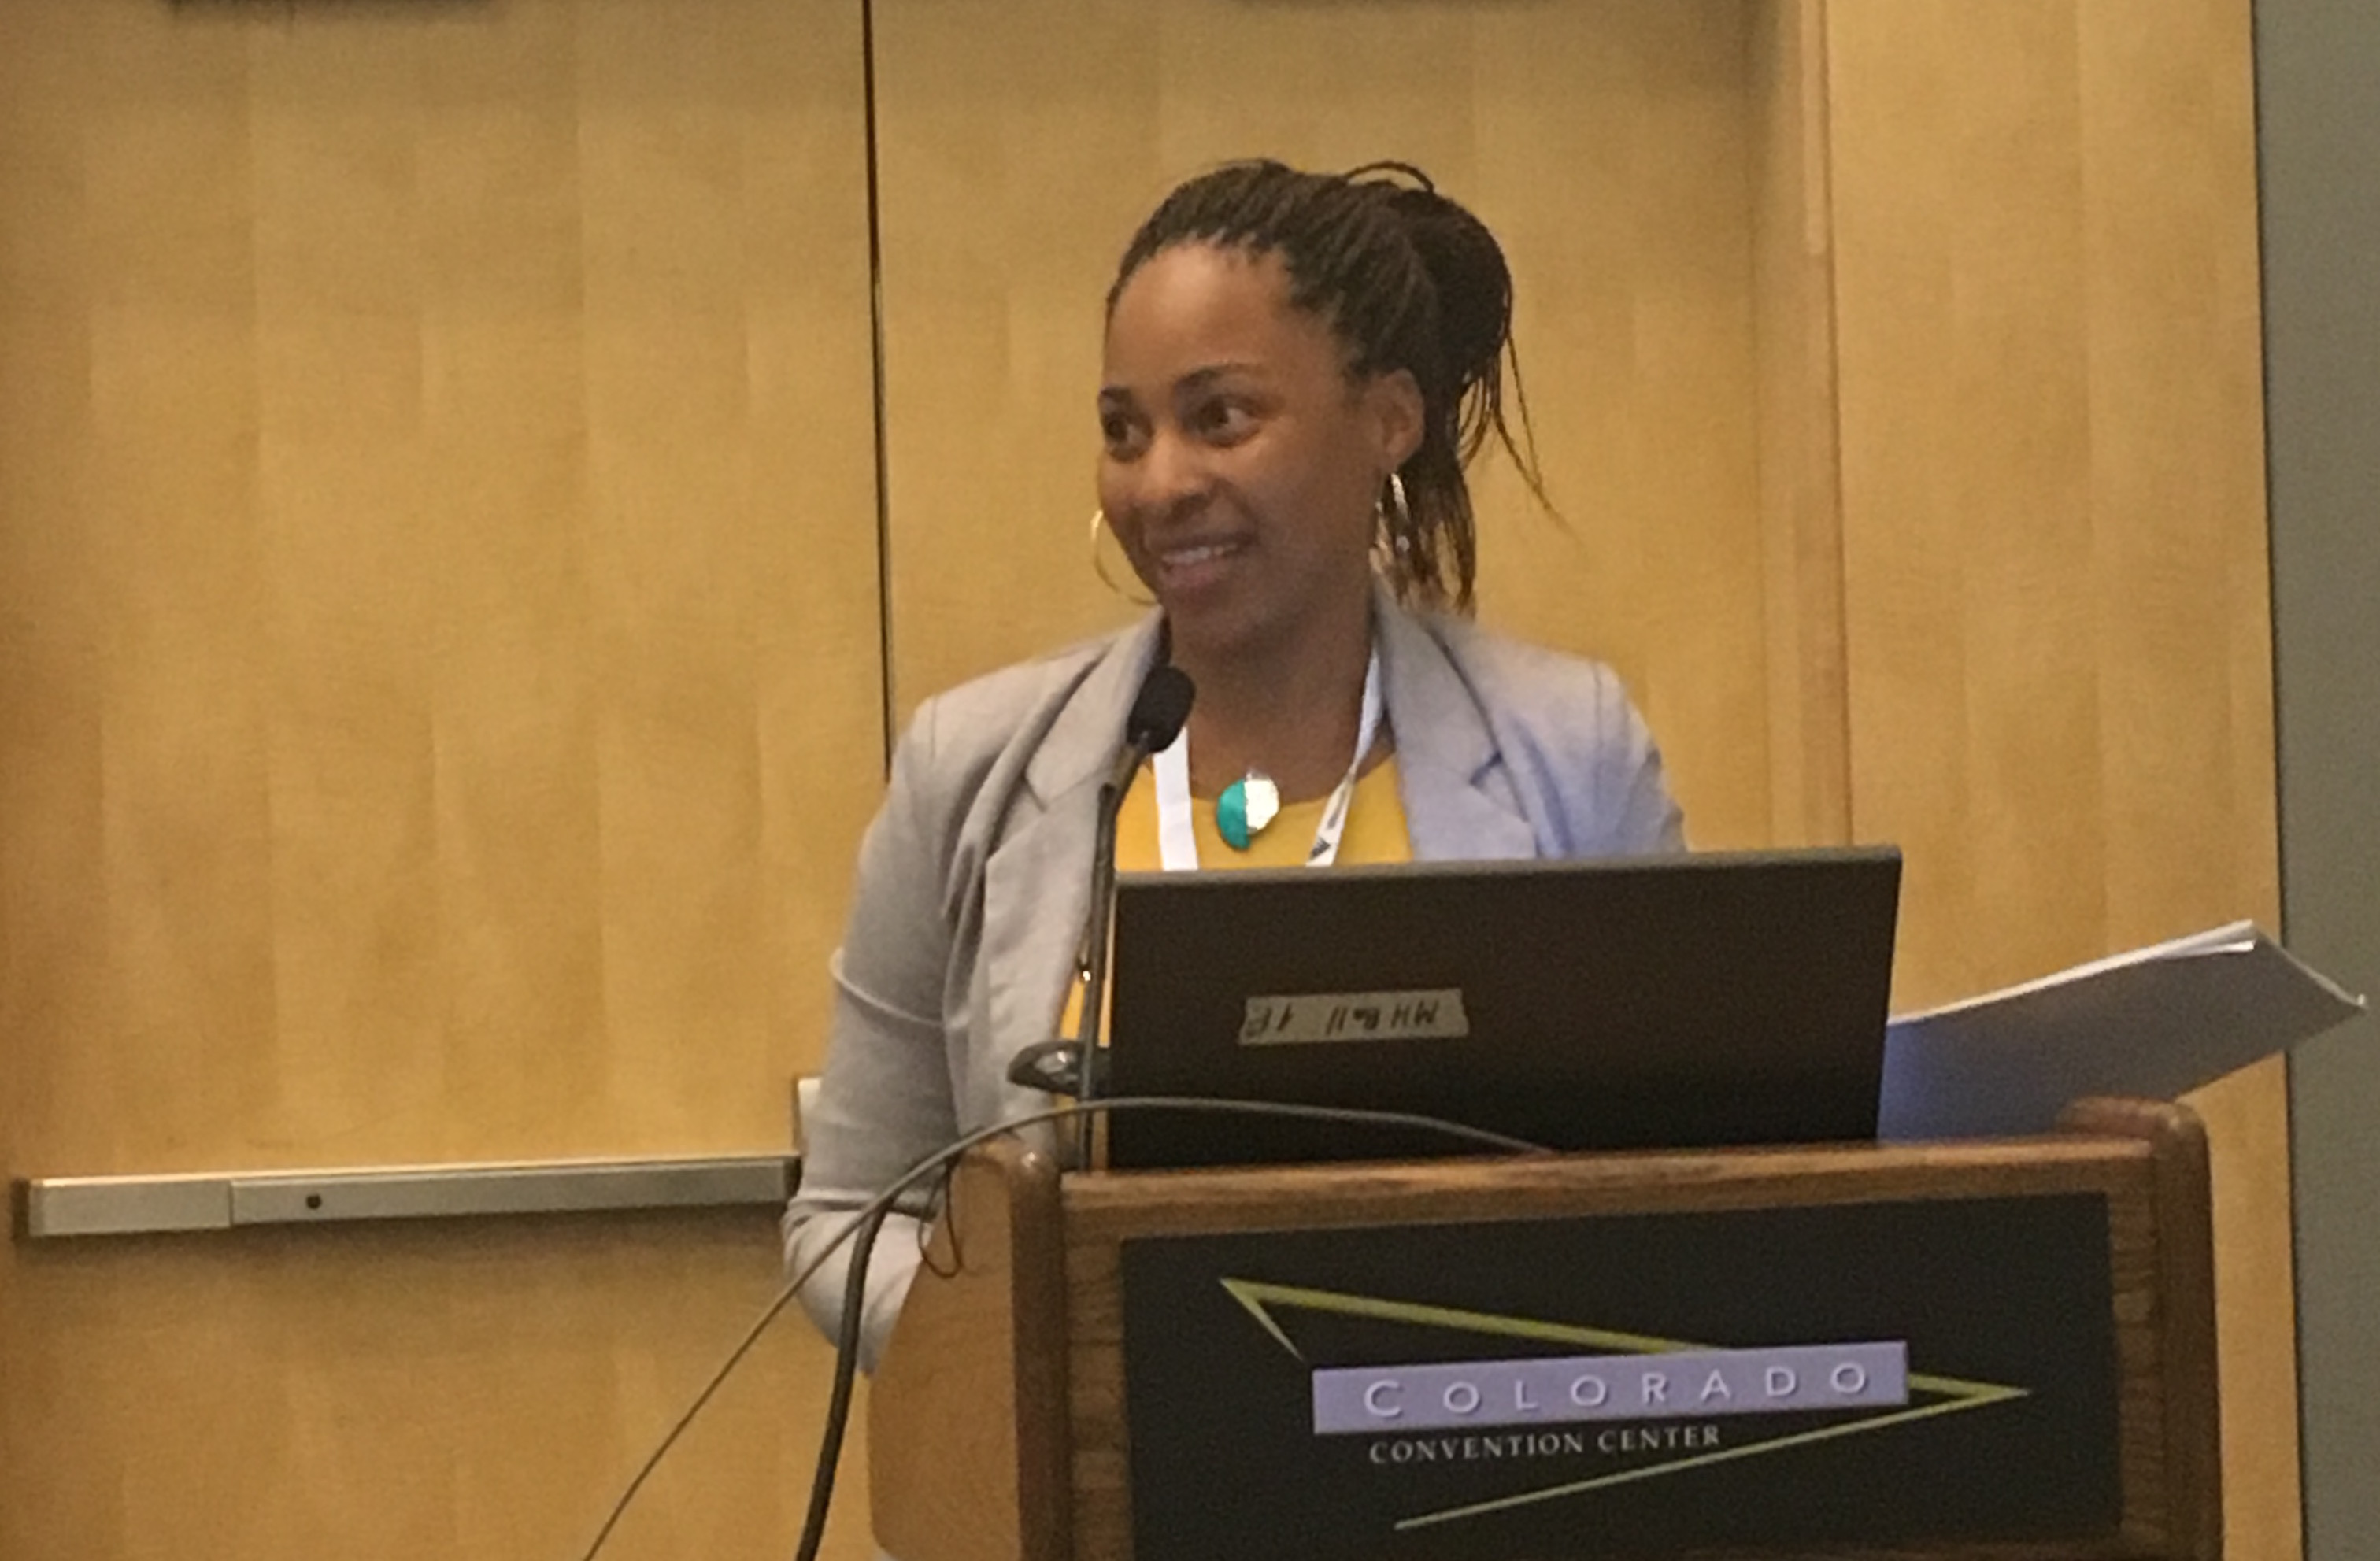 Brianna Singleton, first-year PhD student, presents her work “Assessment of safety culture among transit workers” at this year’s APHA Conference.